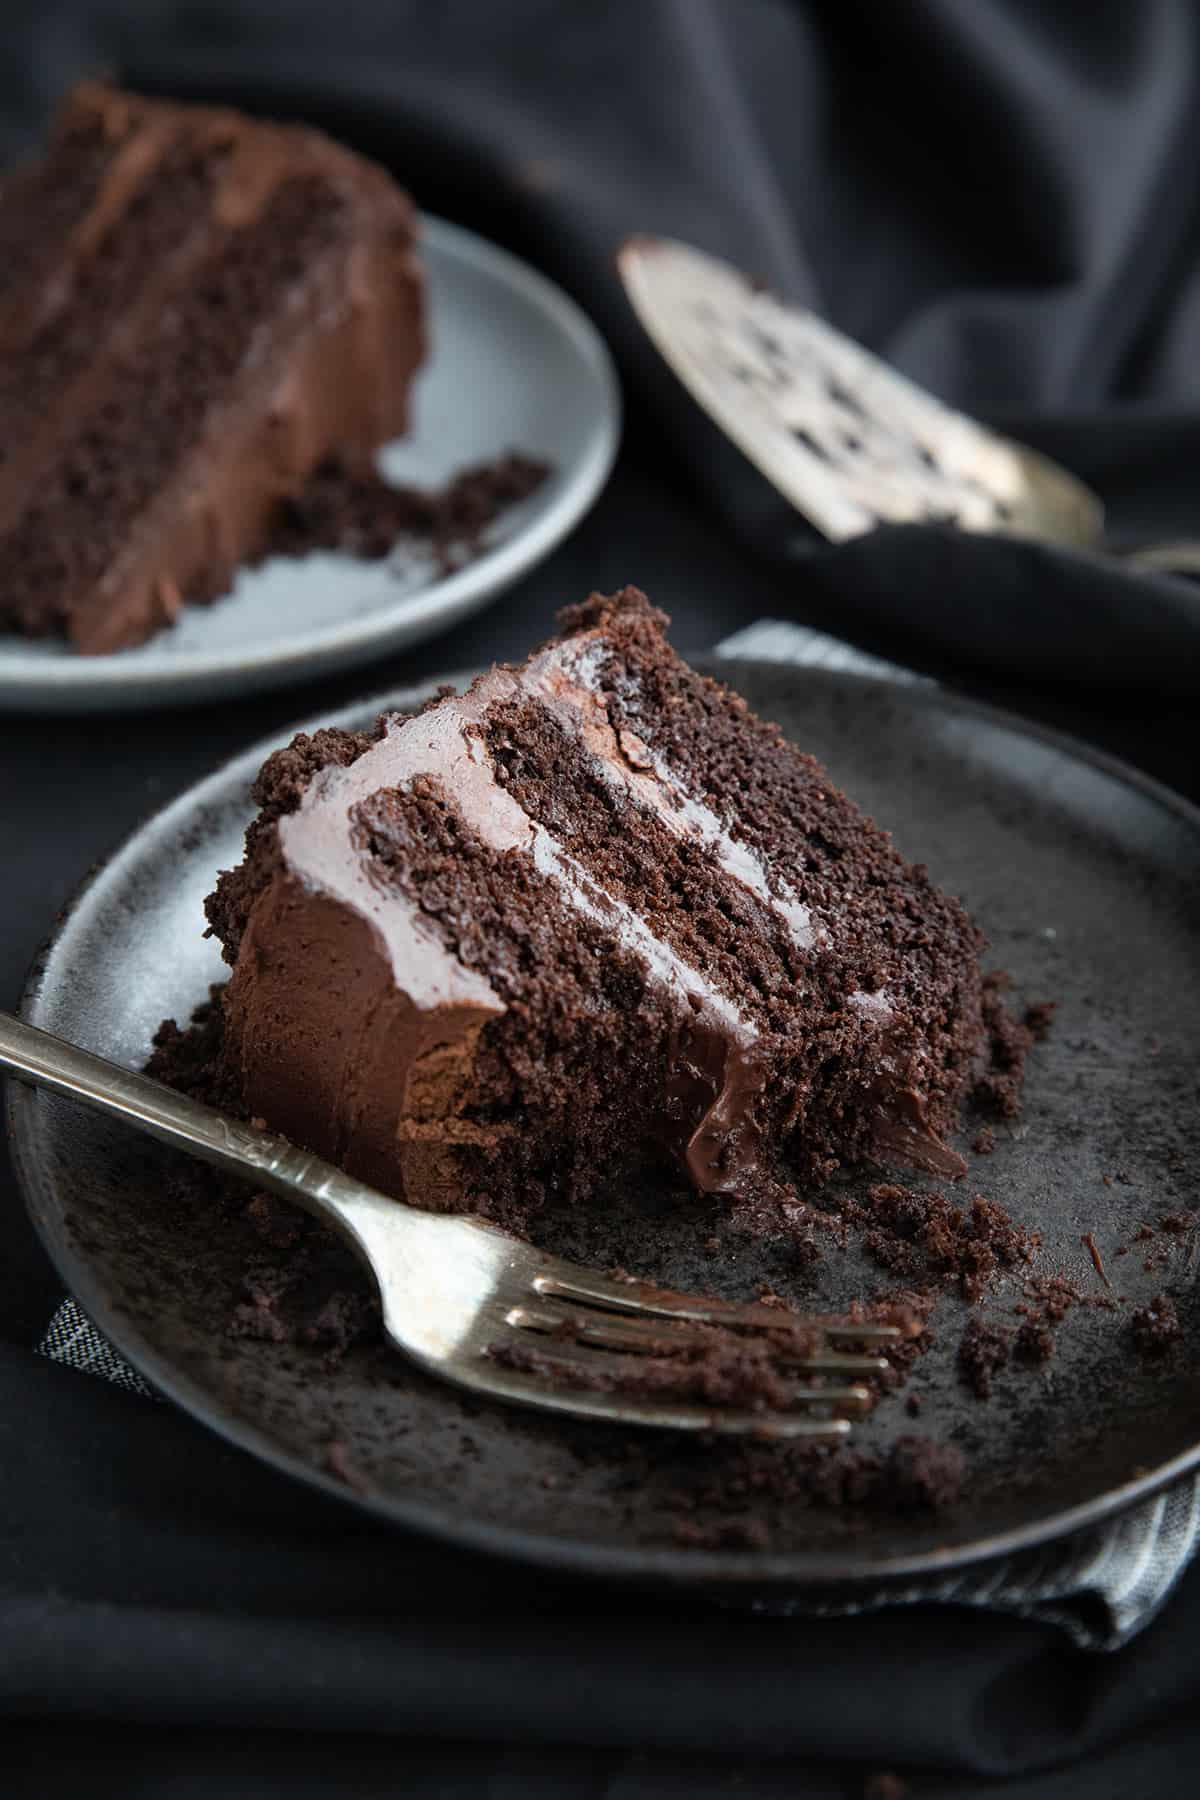 A slice of keto chocolate blackout cake with several bites taken out of it.